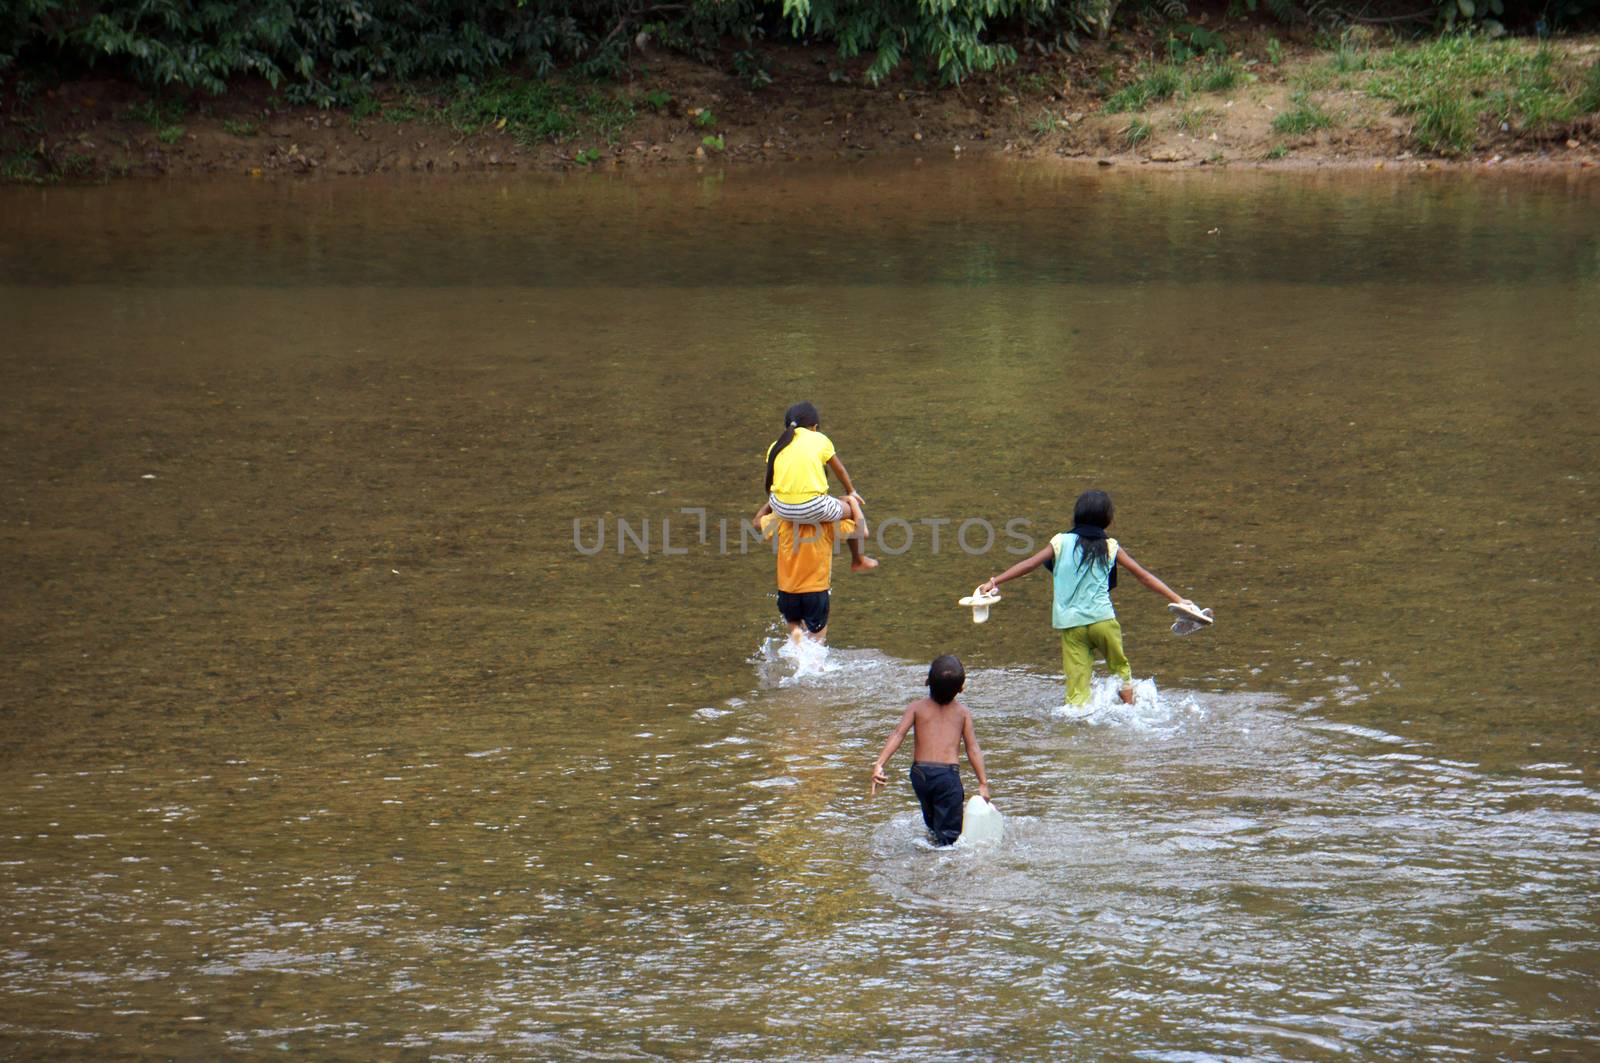 KHANH HOA, VIET NAM- FEBRUARY 5: Chidren  across a stream, this is warning about  children's drowning  situation at countryside, Khanh Hoa, February 5, 2013 